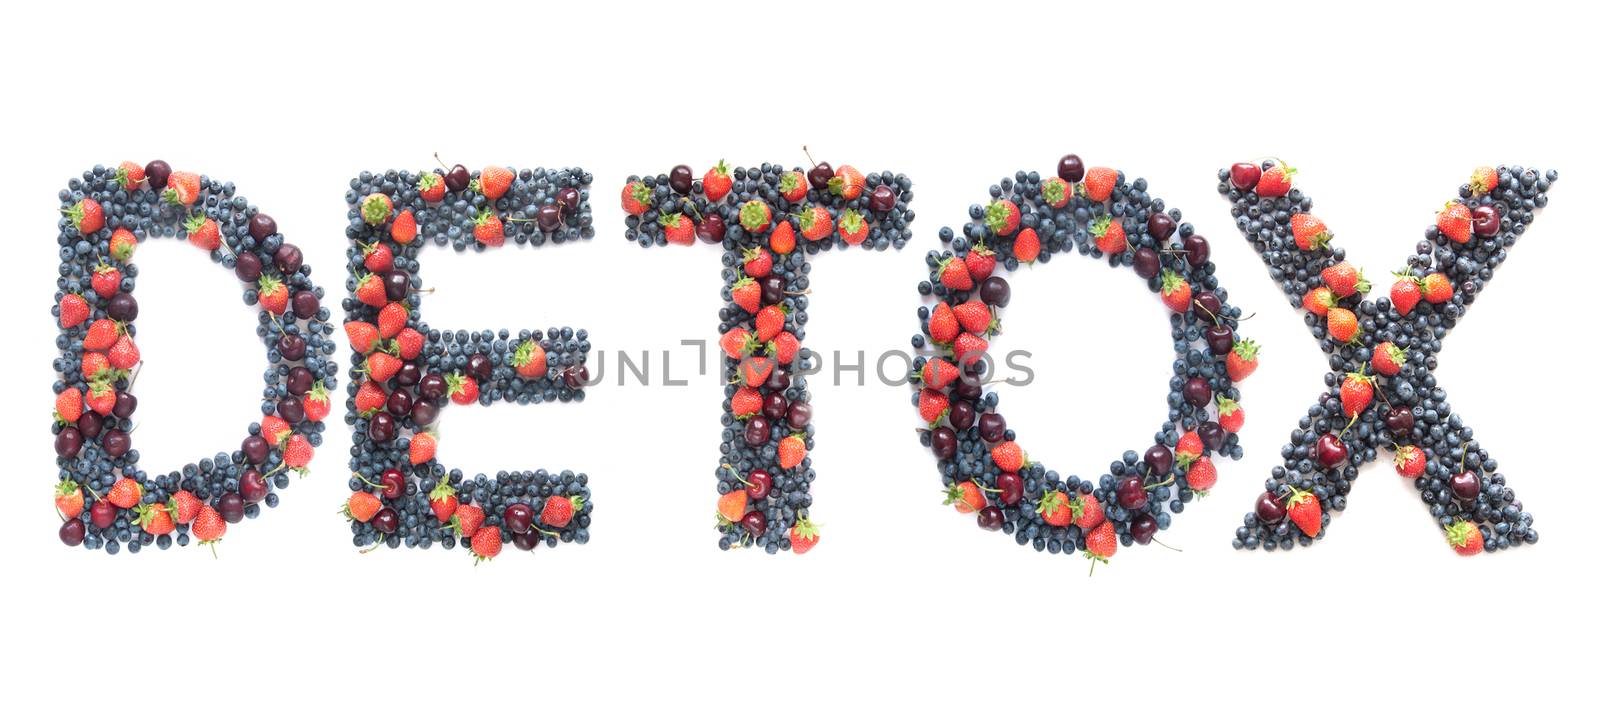 Detox word made from berries  by unikpix